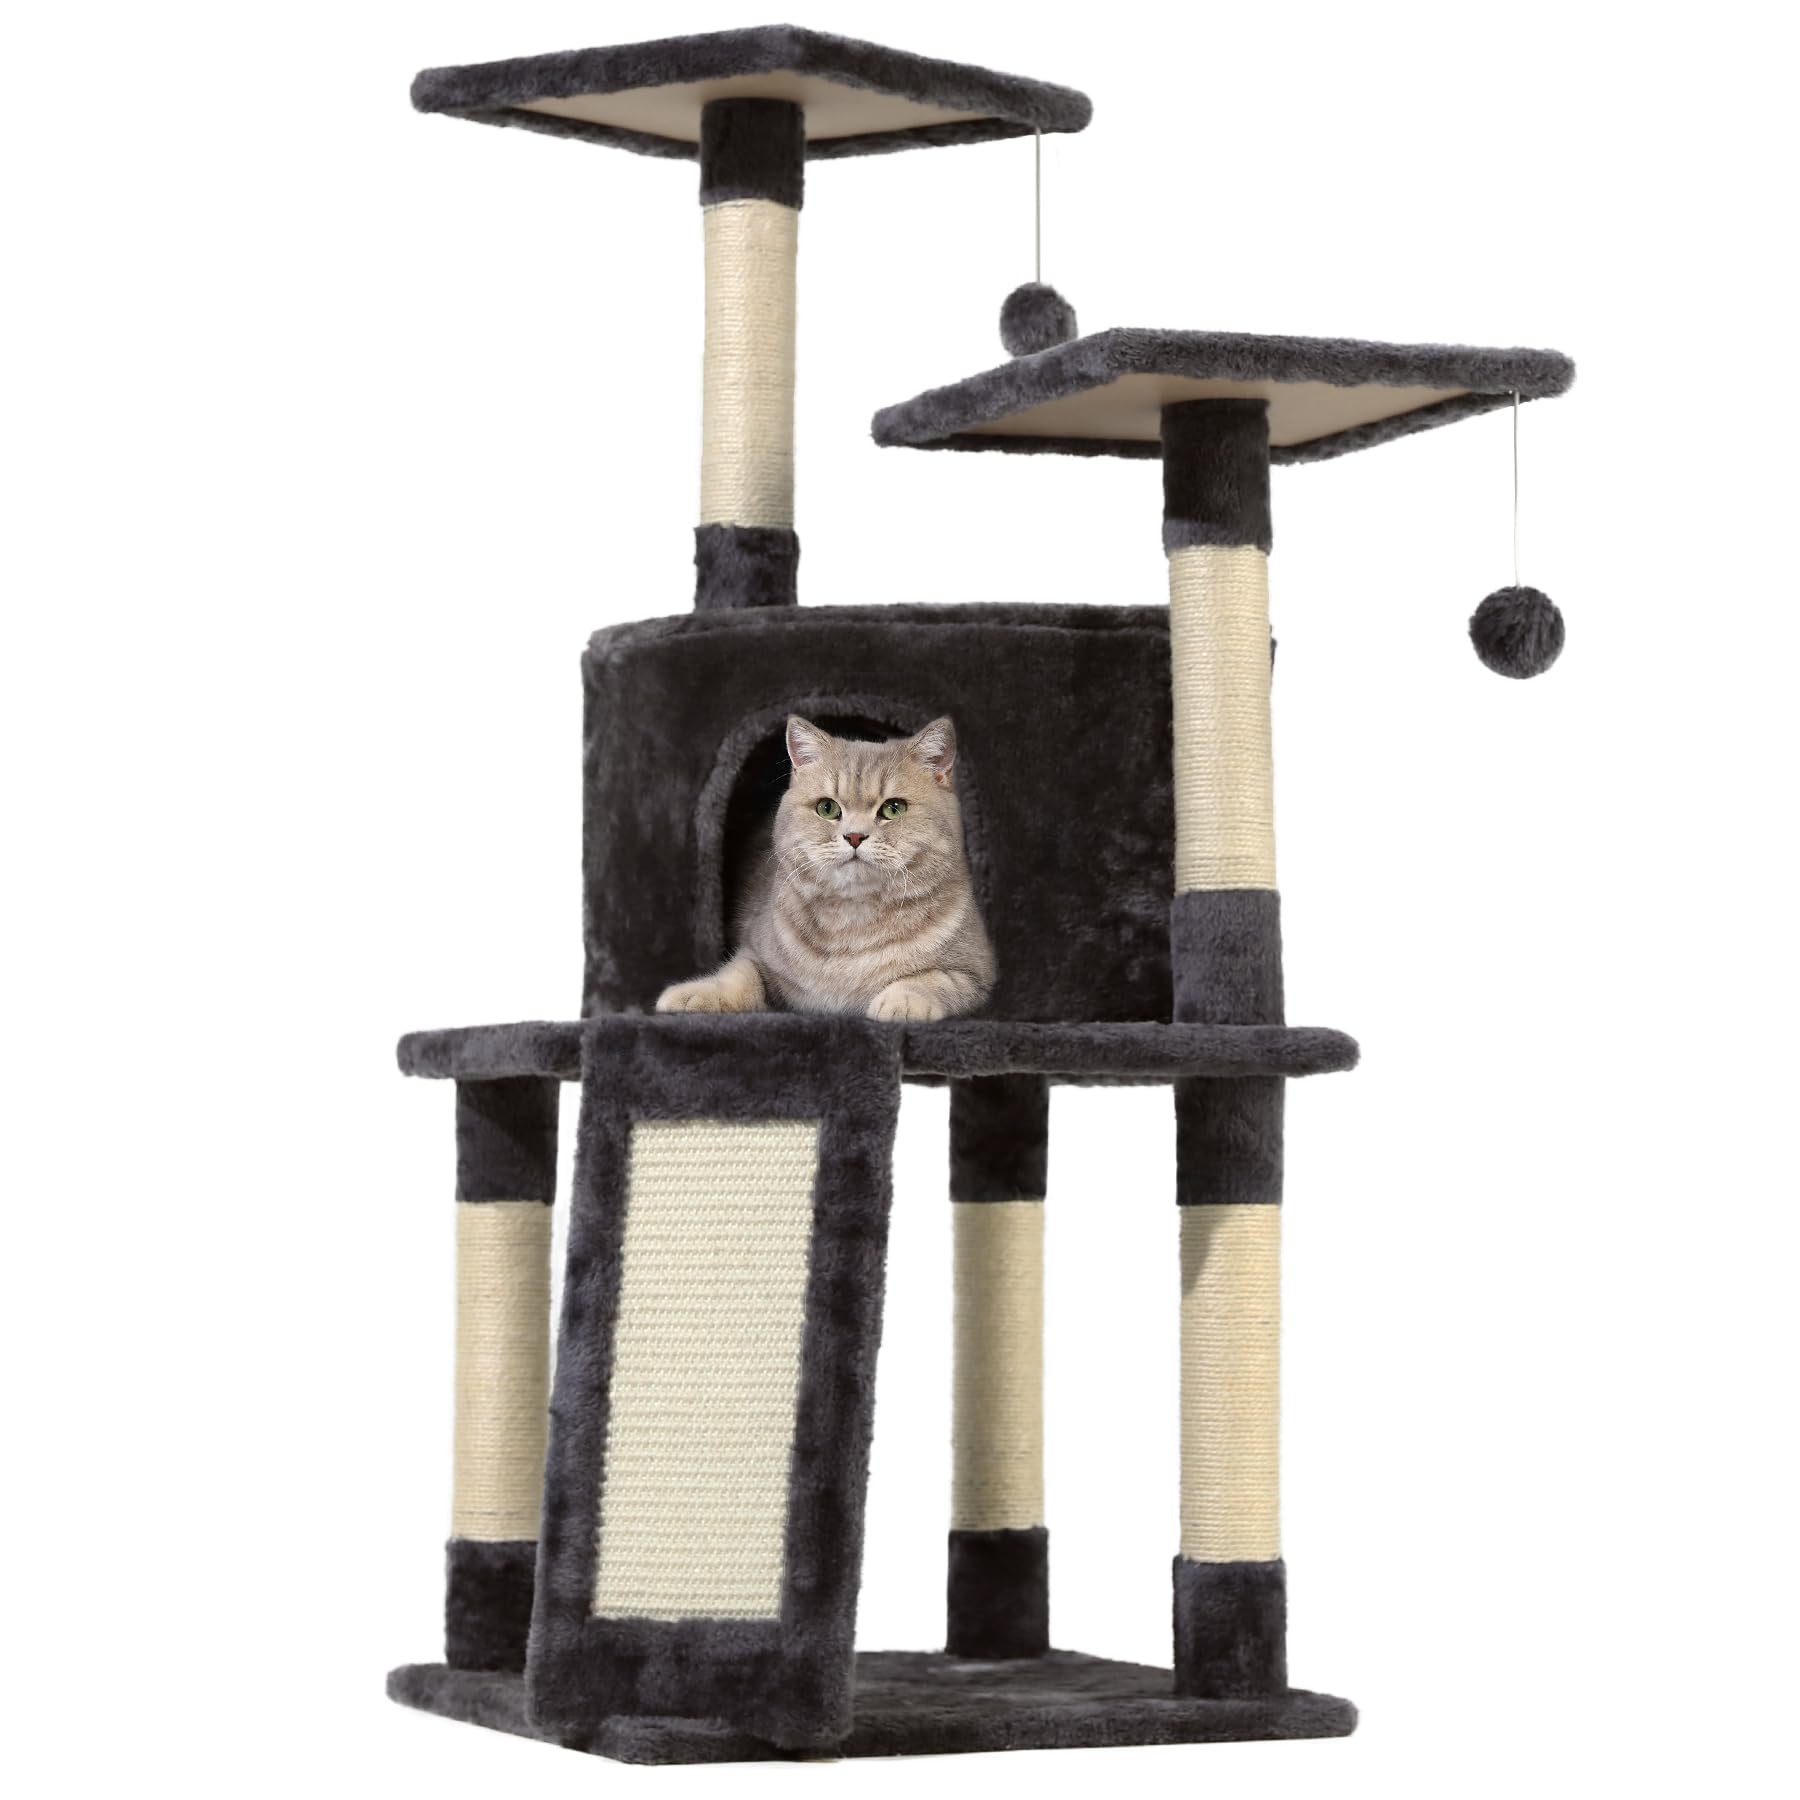 KSIIA Cat Tree for Indoor Cats 38 inch Cat Tower with Sisal-Covered Scratching Post and Multi-Level Perches Kittens Cozy Cat Condo, Grey2 $27.49